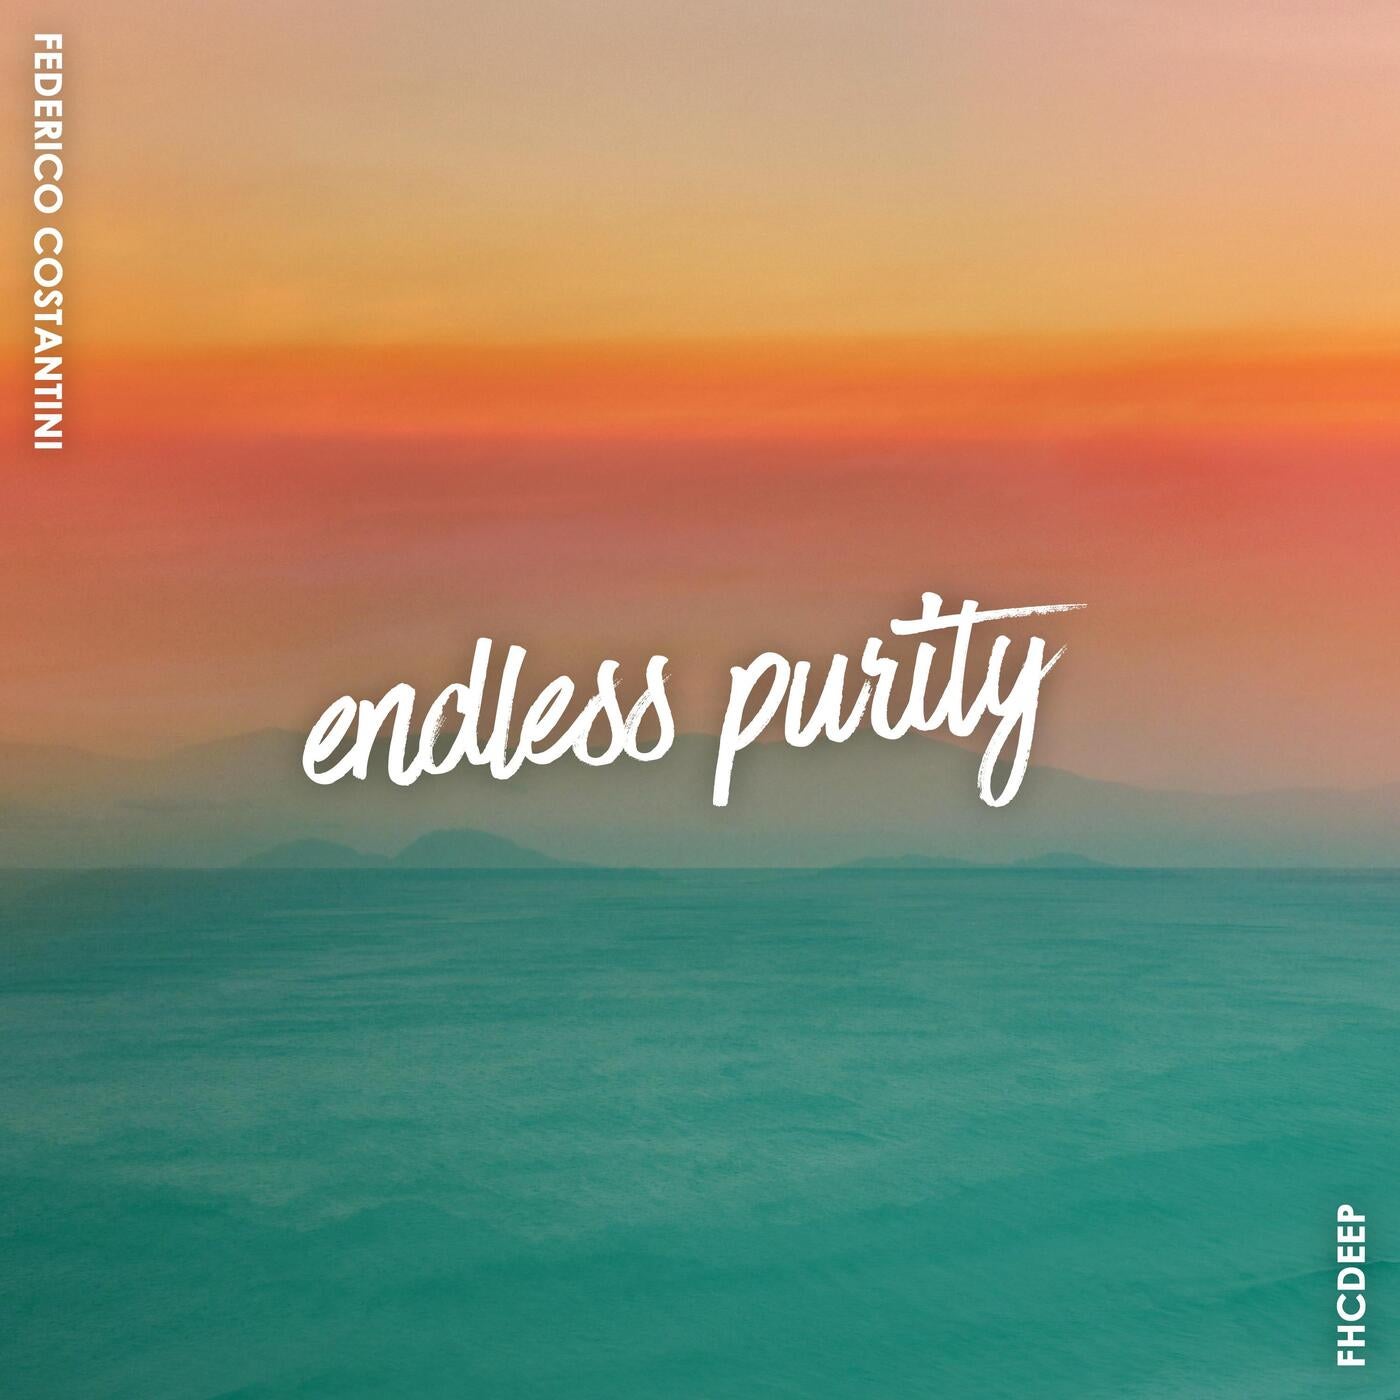 Endless Purity